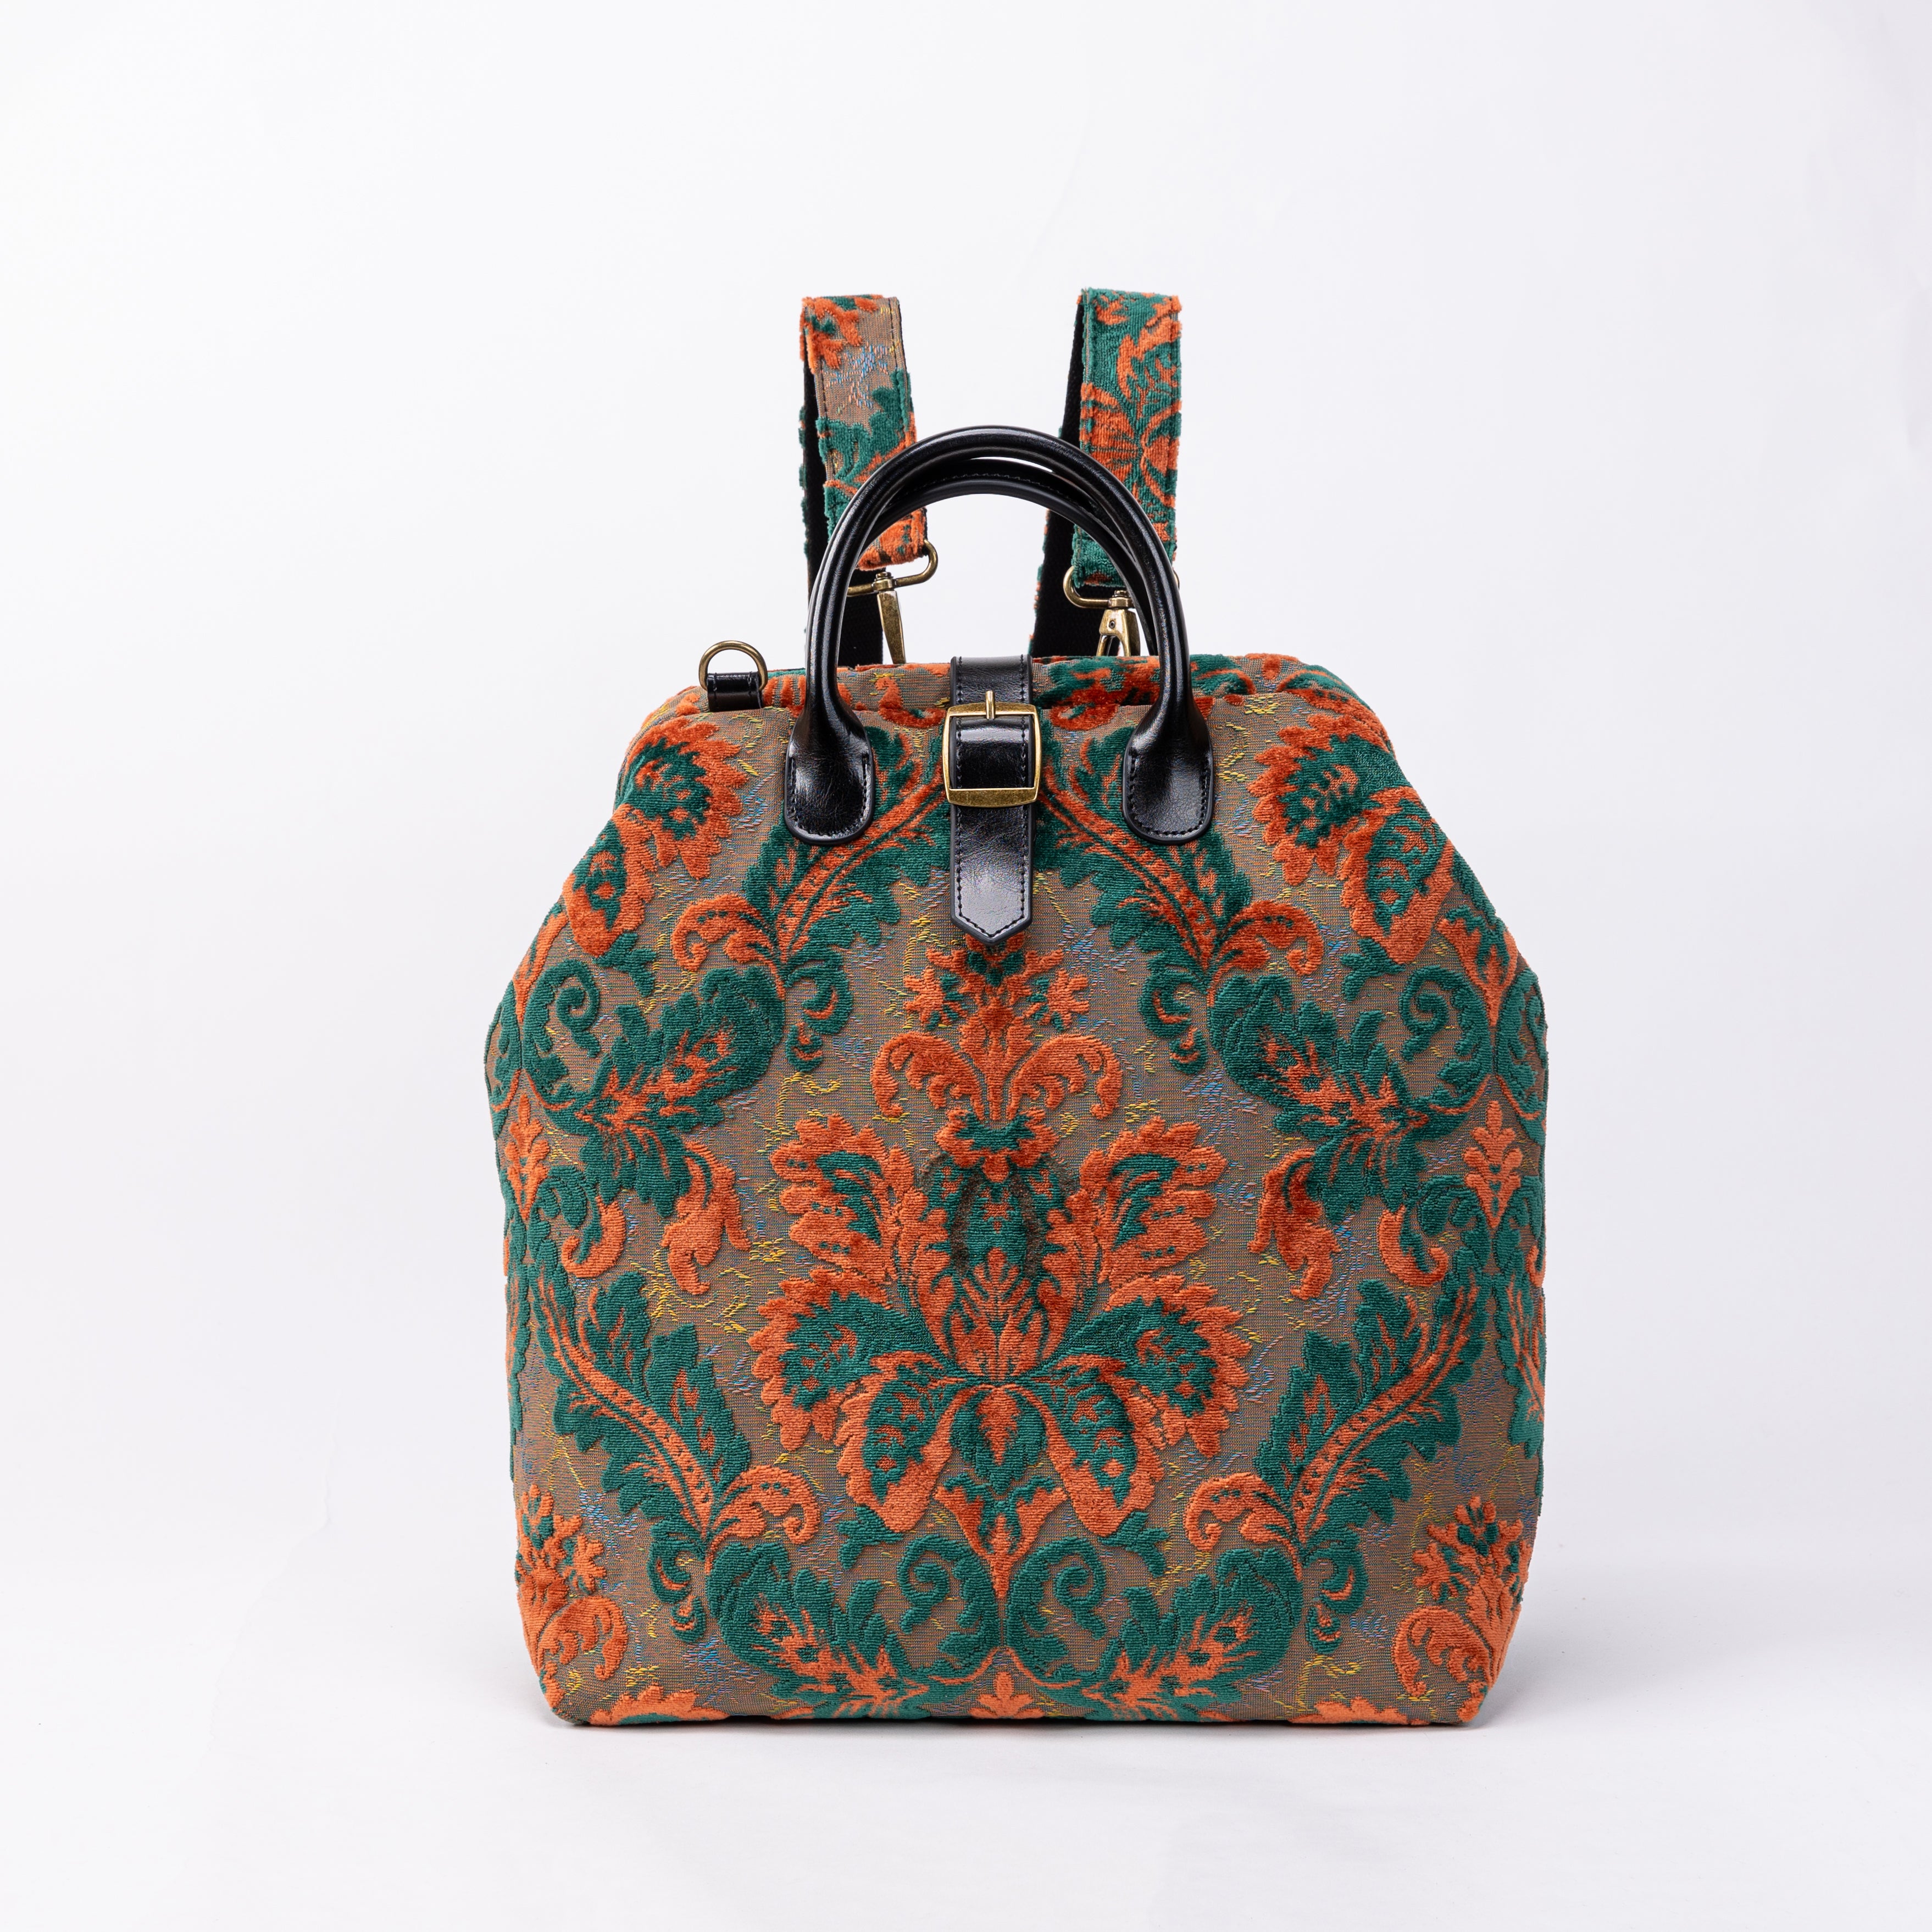 Revival jade Carpet Laptop Backpack Mary Poppins Bag front